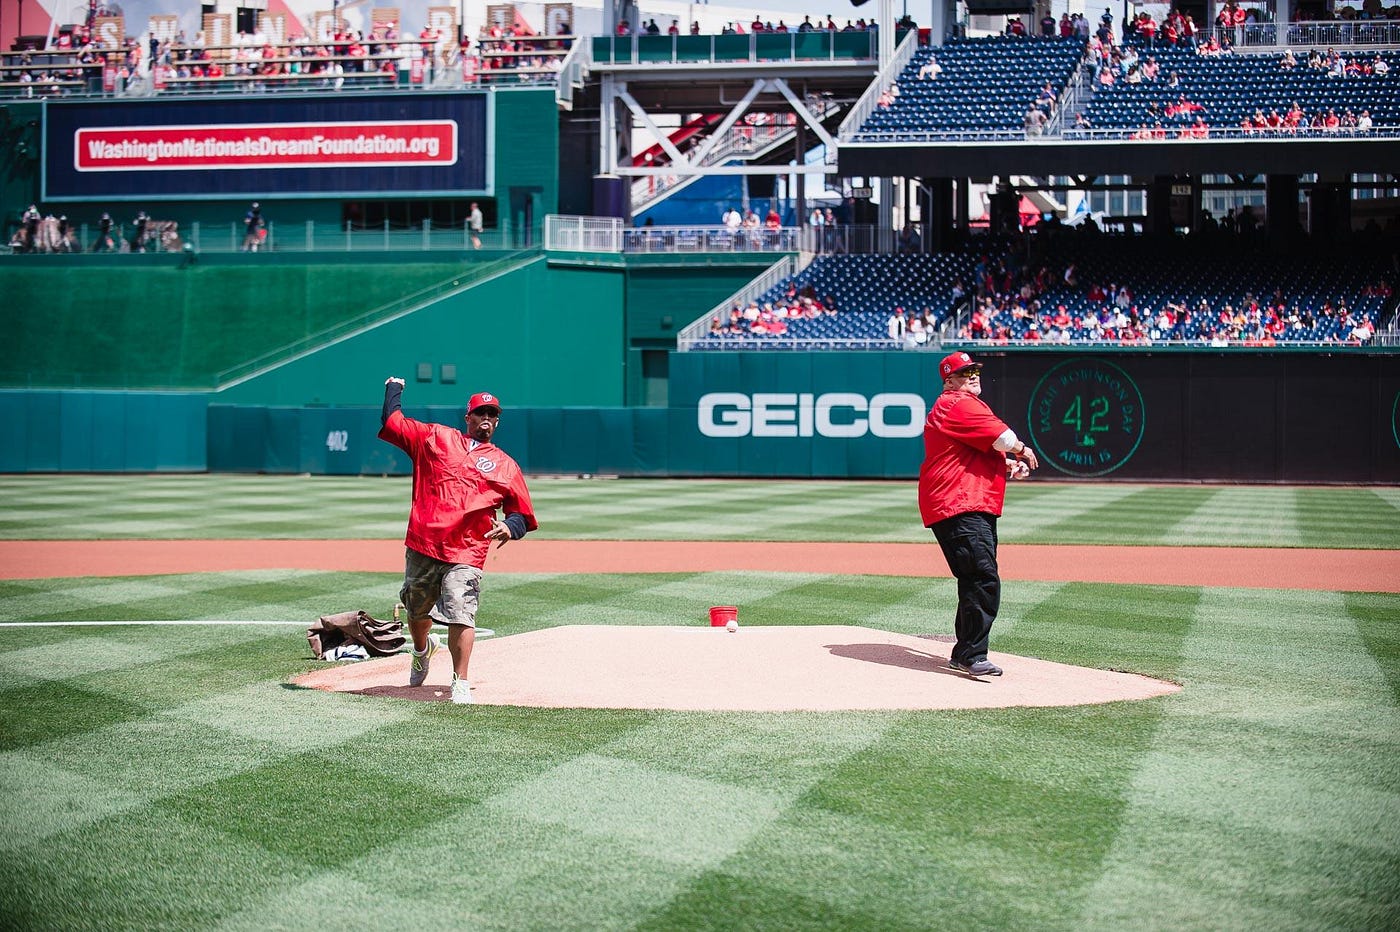 PHOTOS: Jackie Robinson Day and Black Heritage Day at Nationals Park, by  Nationals Communications